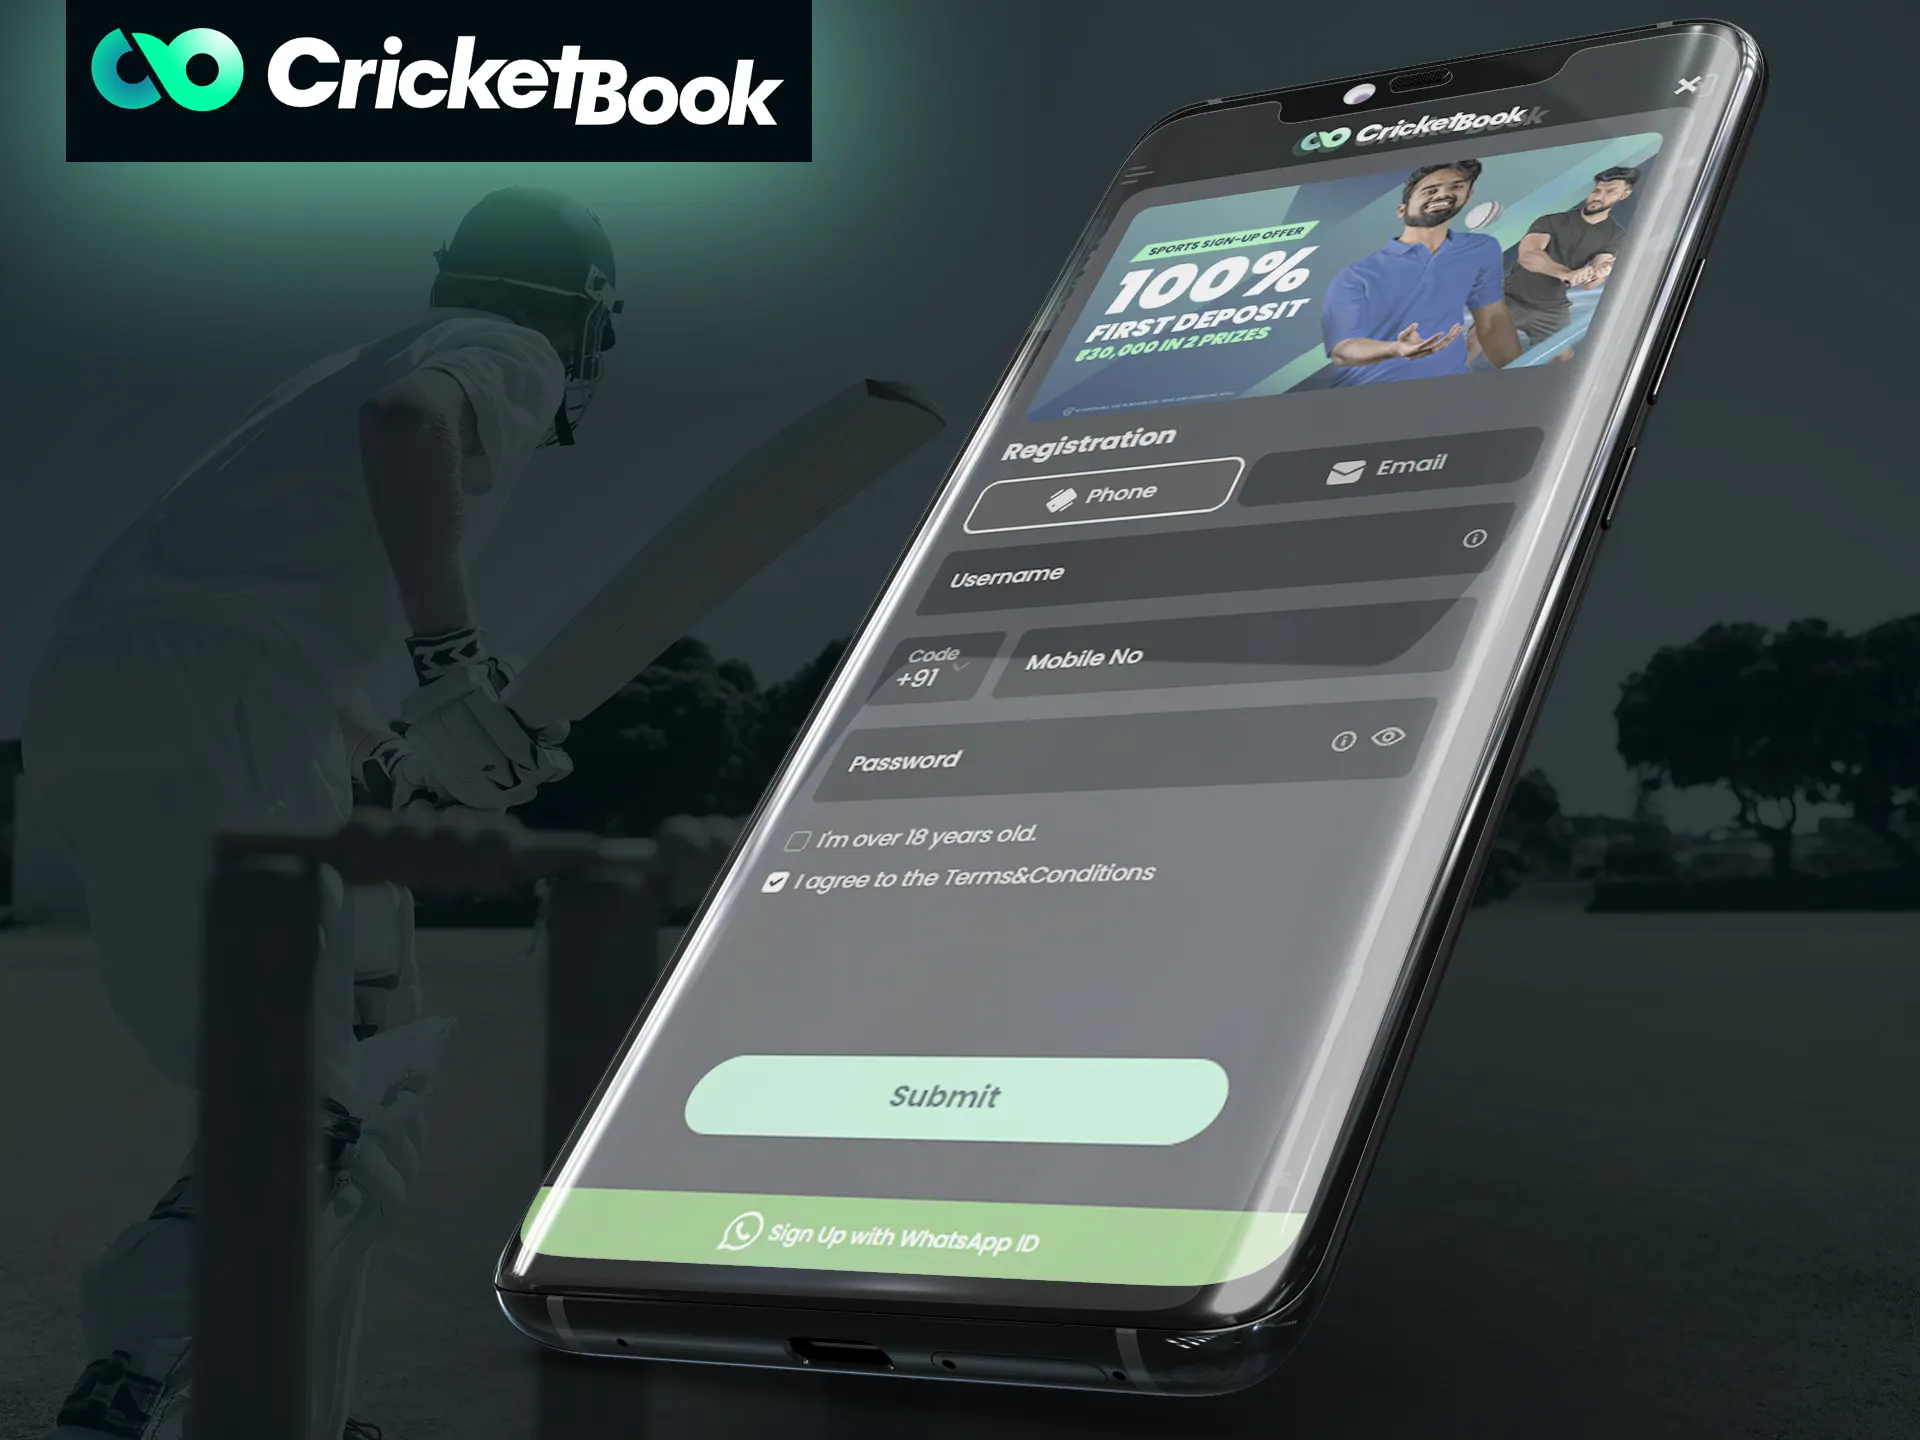 Sign up for Cricketbook using your mobile device.